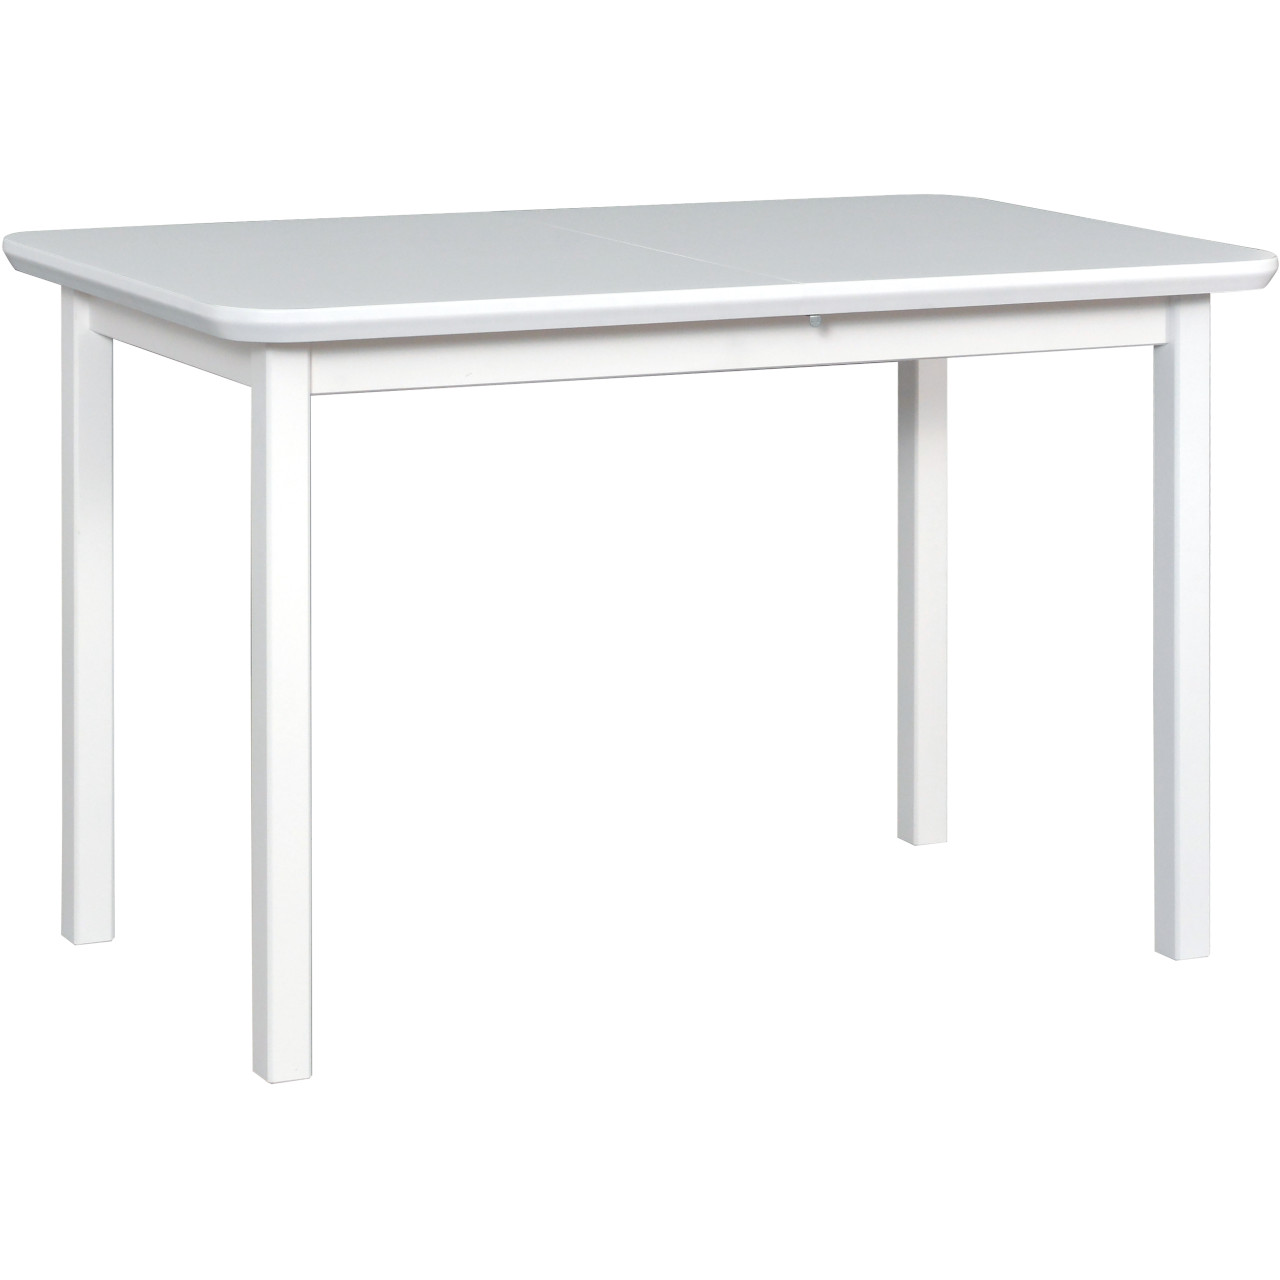 Table MAX 4 70x120/150 white MDF